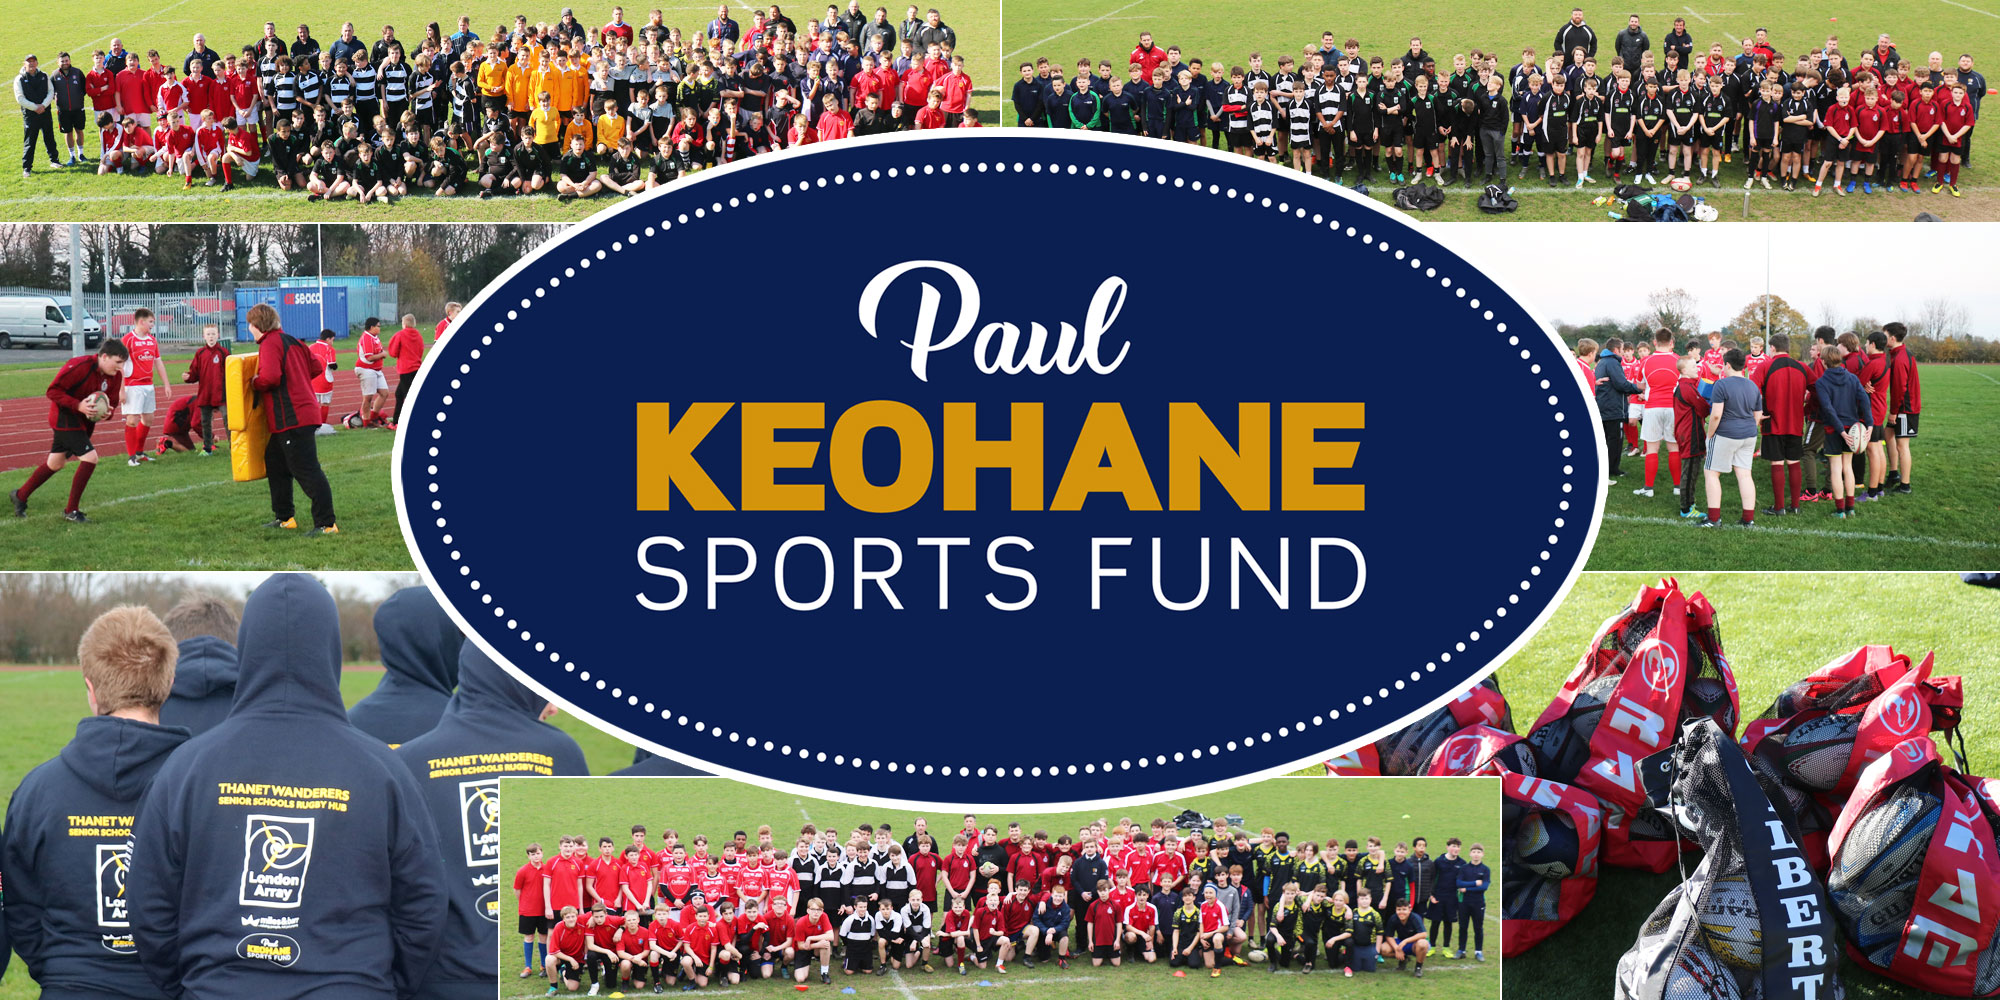 Image for the Paul Keohane Sports Fund Website news article